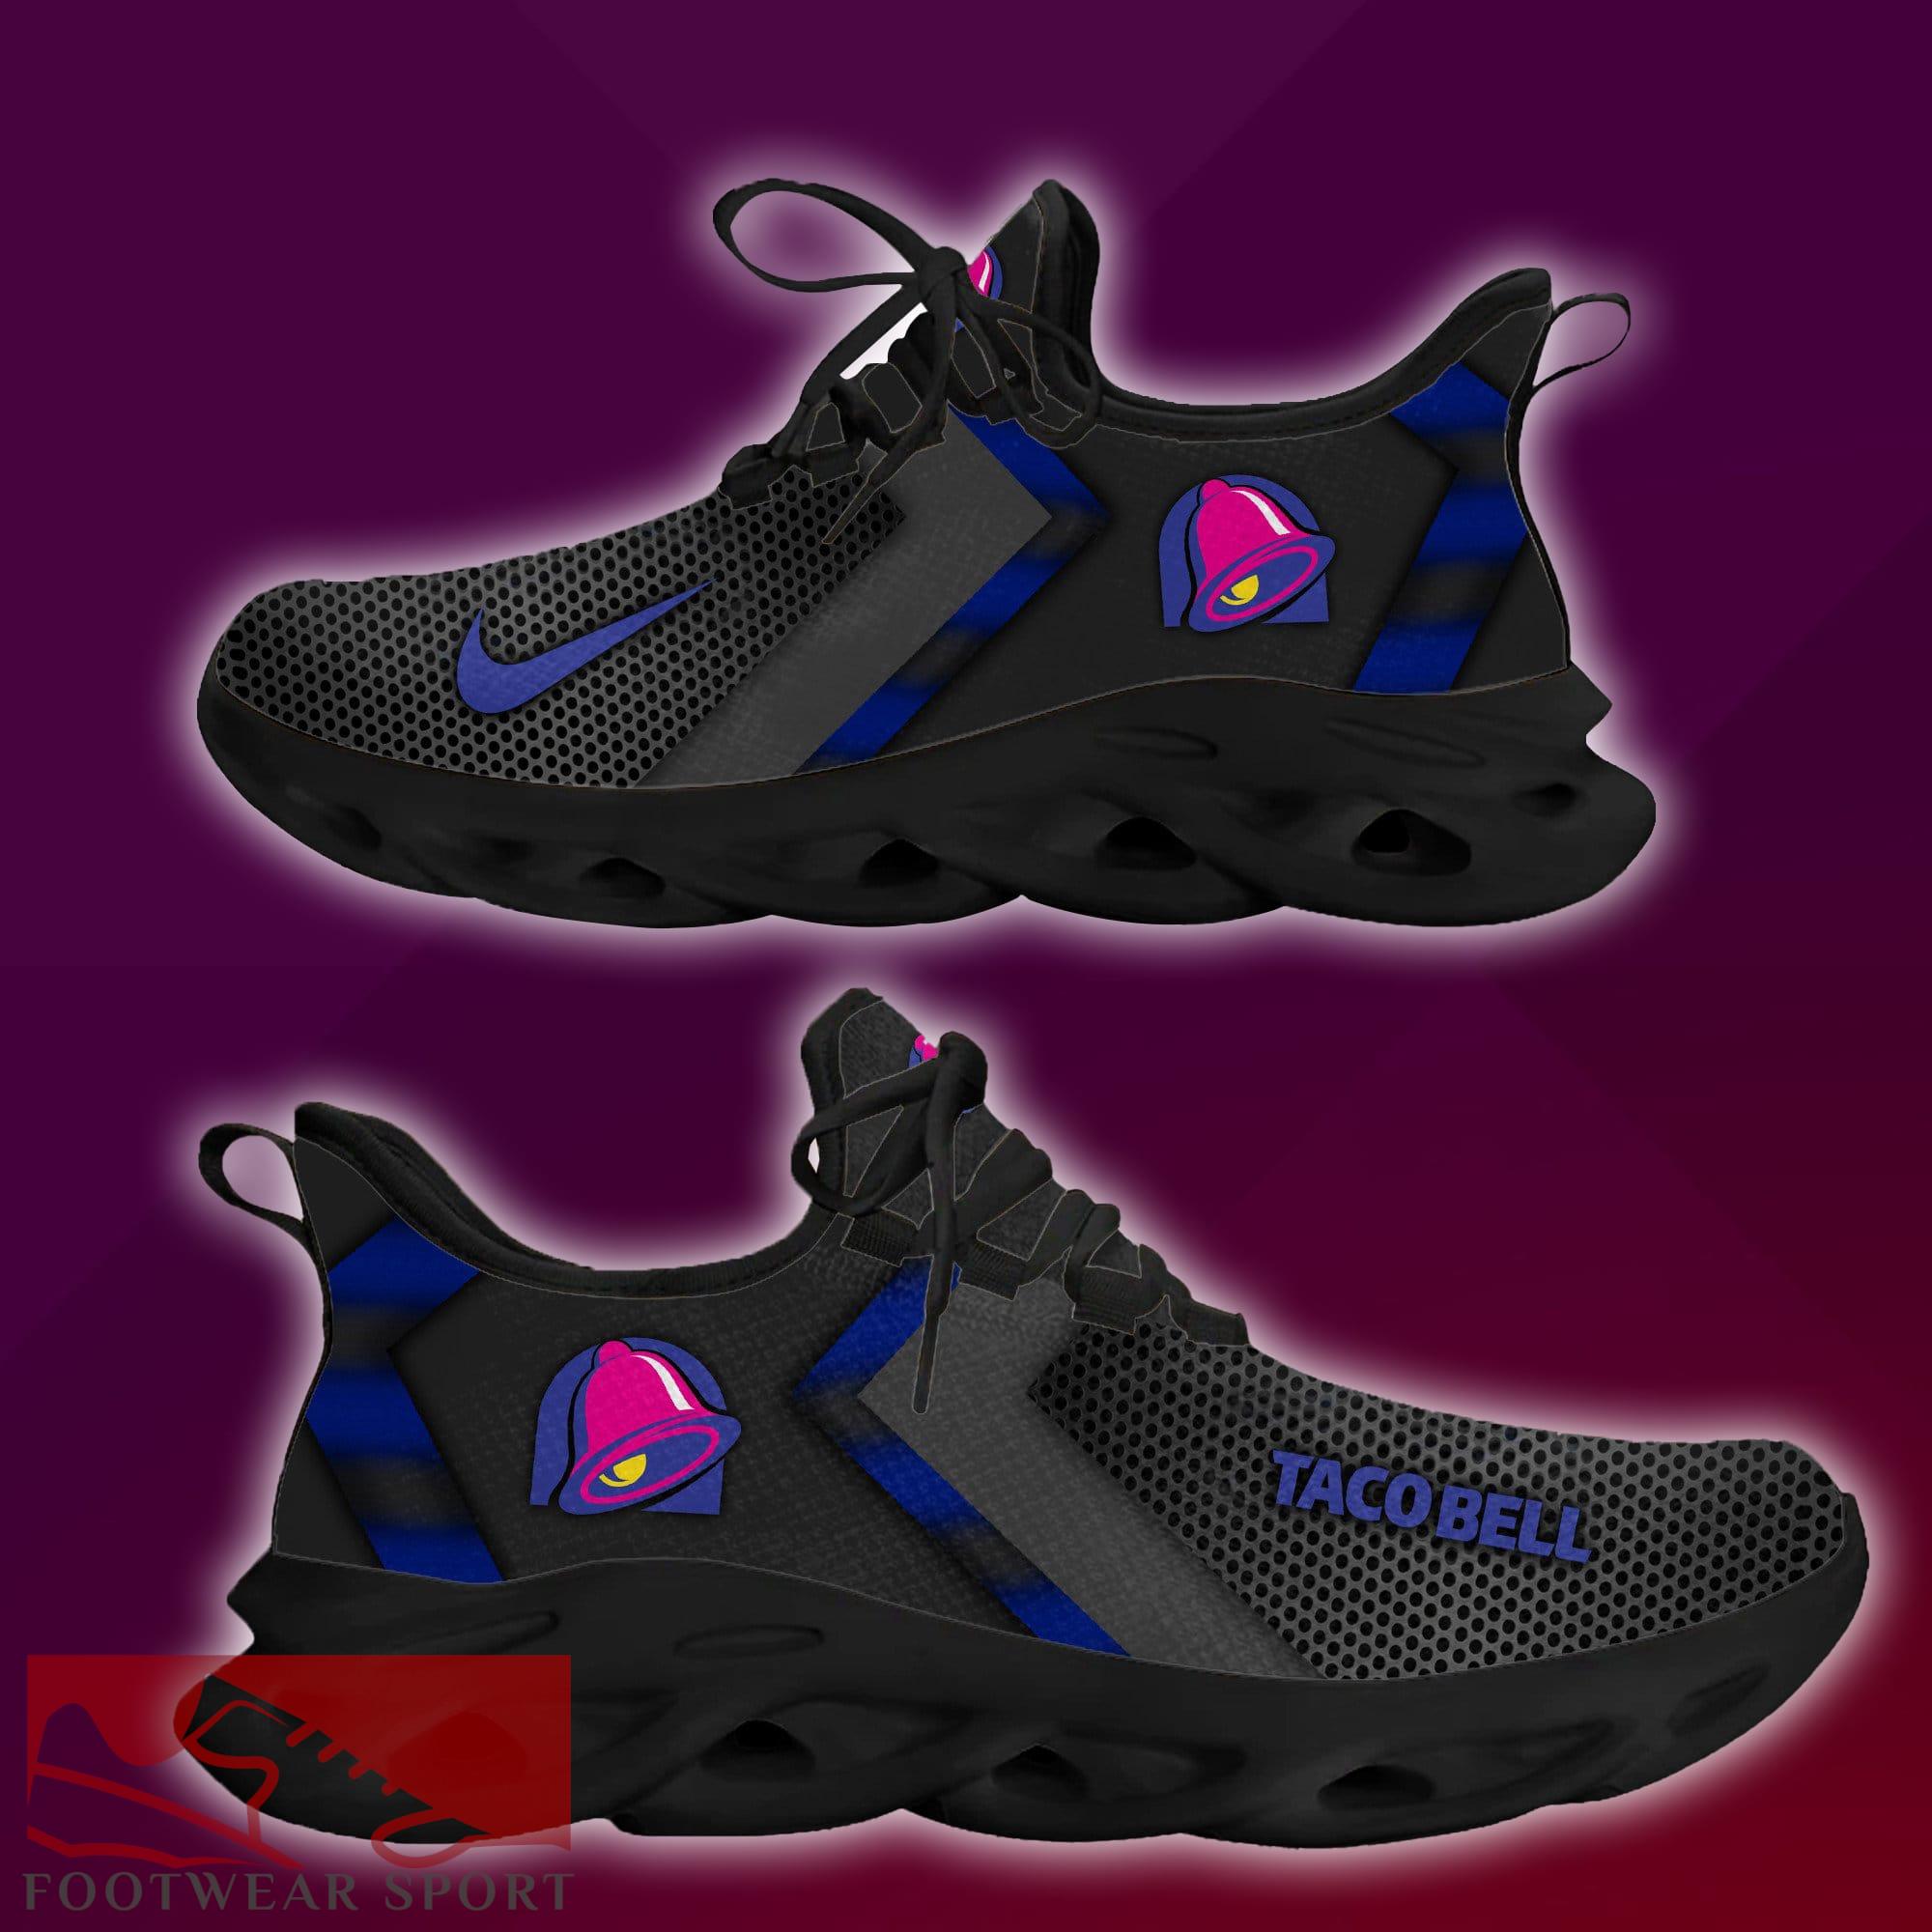 taco bell Brand New Logo Max Soul Sneakers Panache Running Shoes Gift - taco bell New Brand Chunky Shoes Style Max Soul Sneakers Photo 1